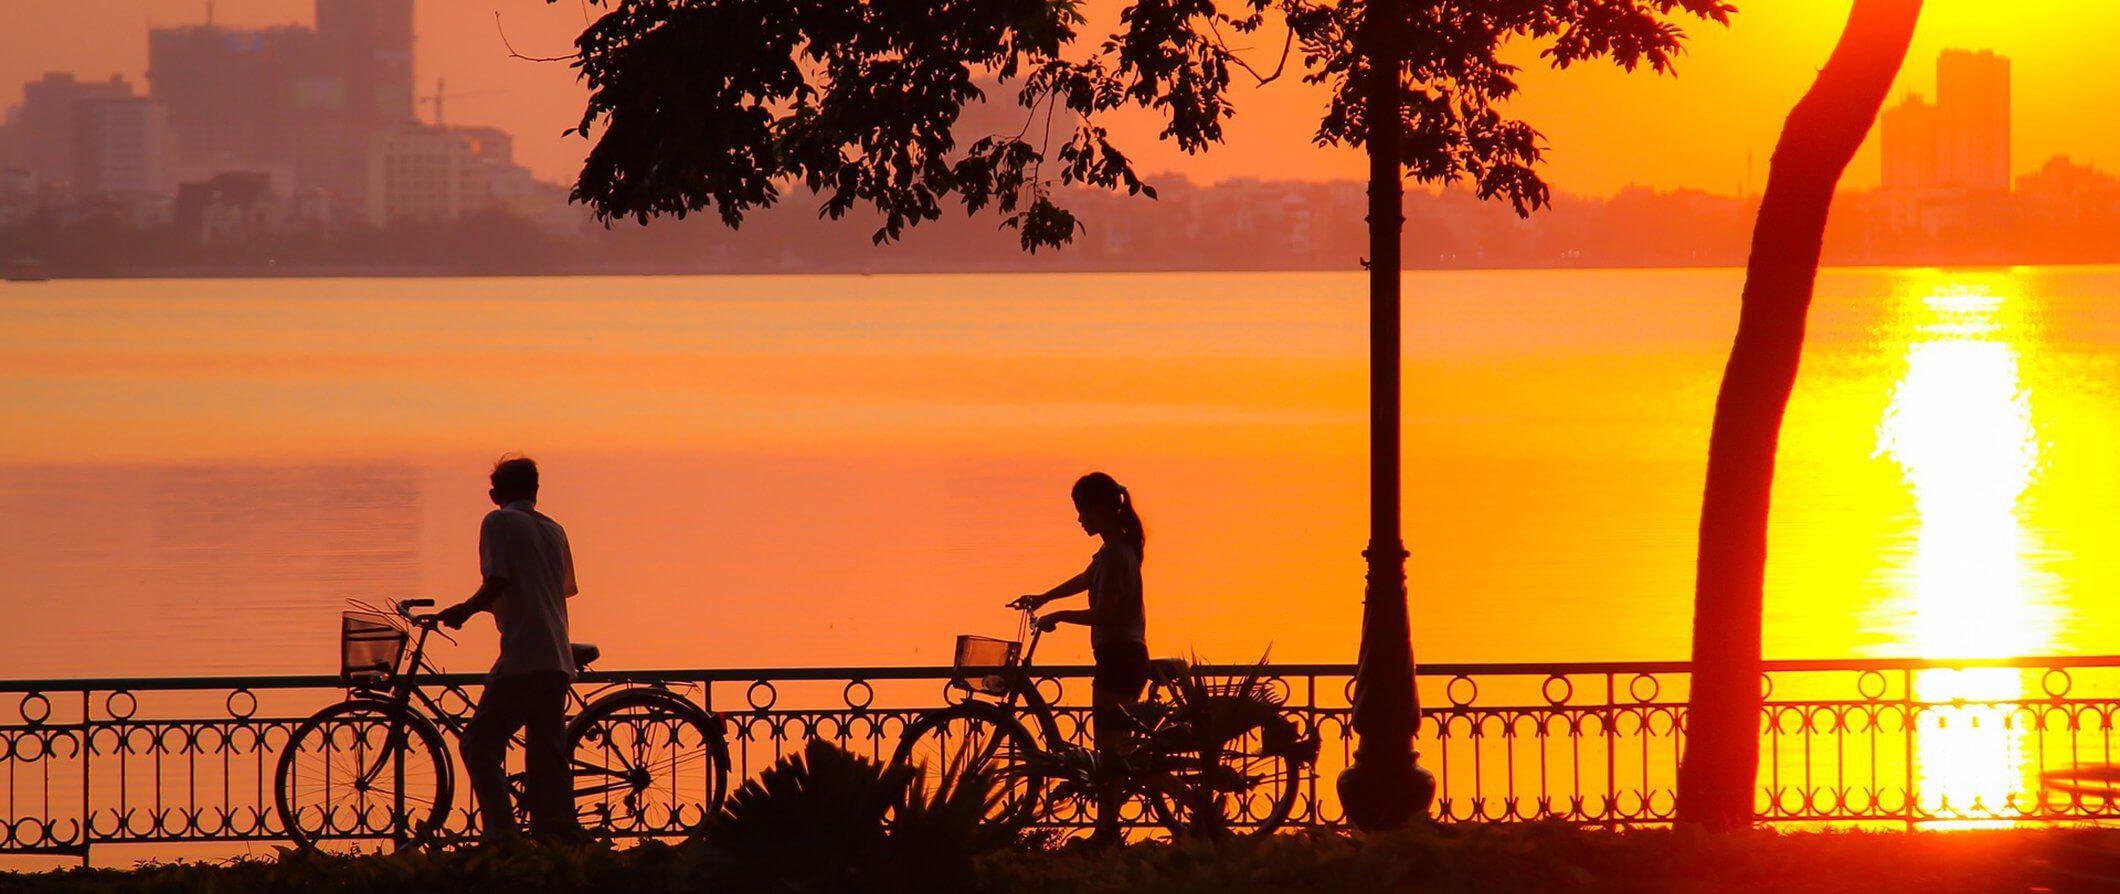 two people walking with bicycles across a bridge silhouetted in the sunset.